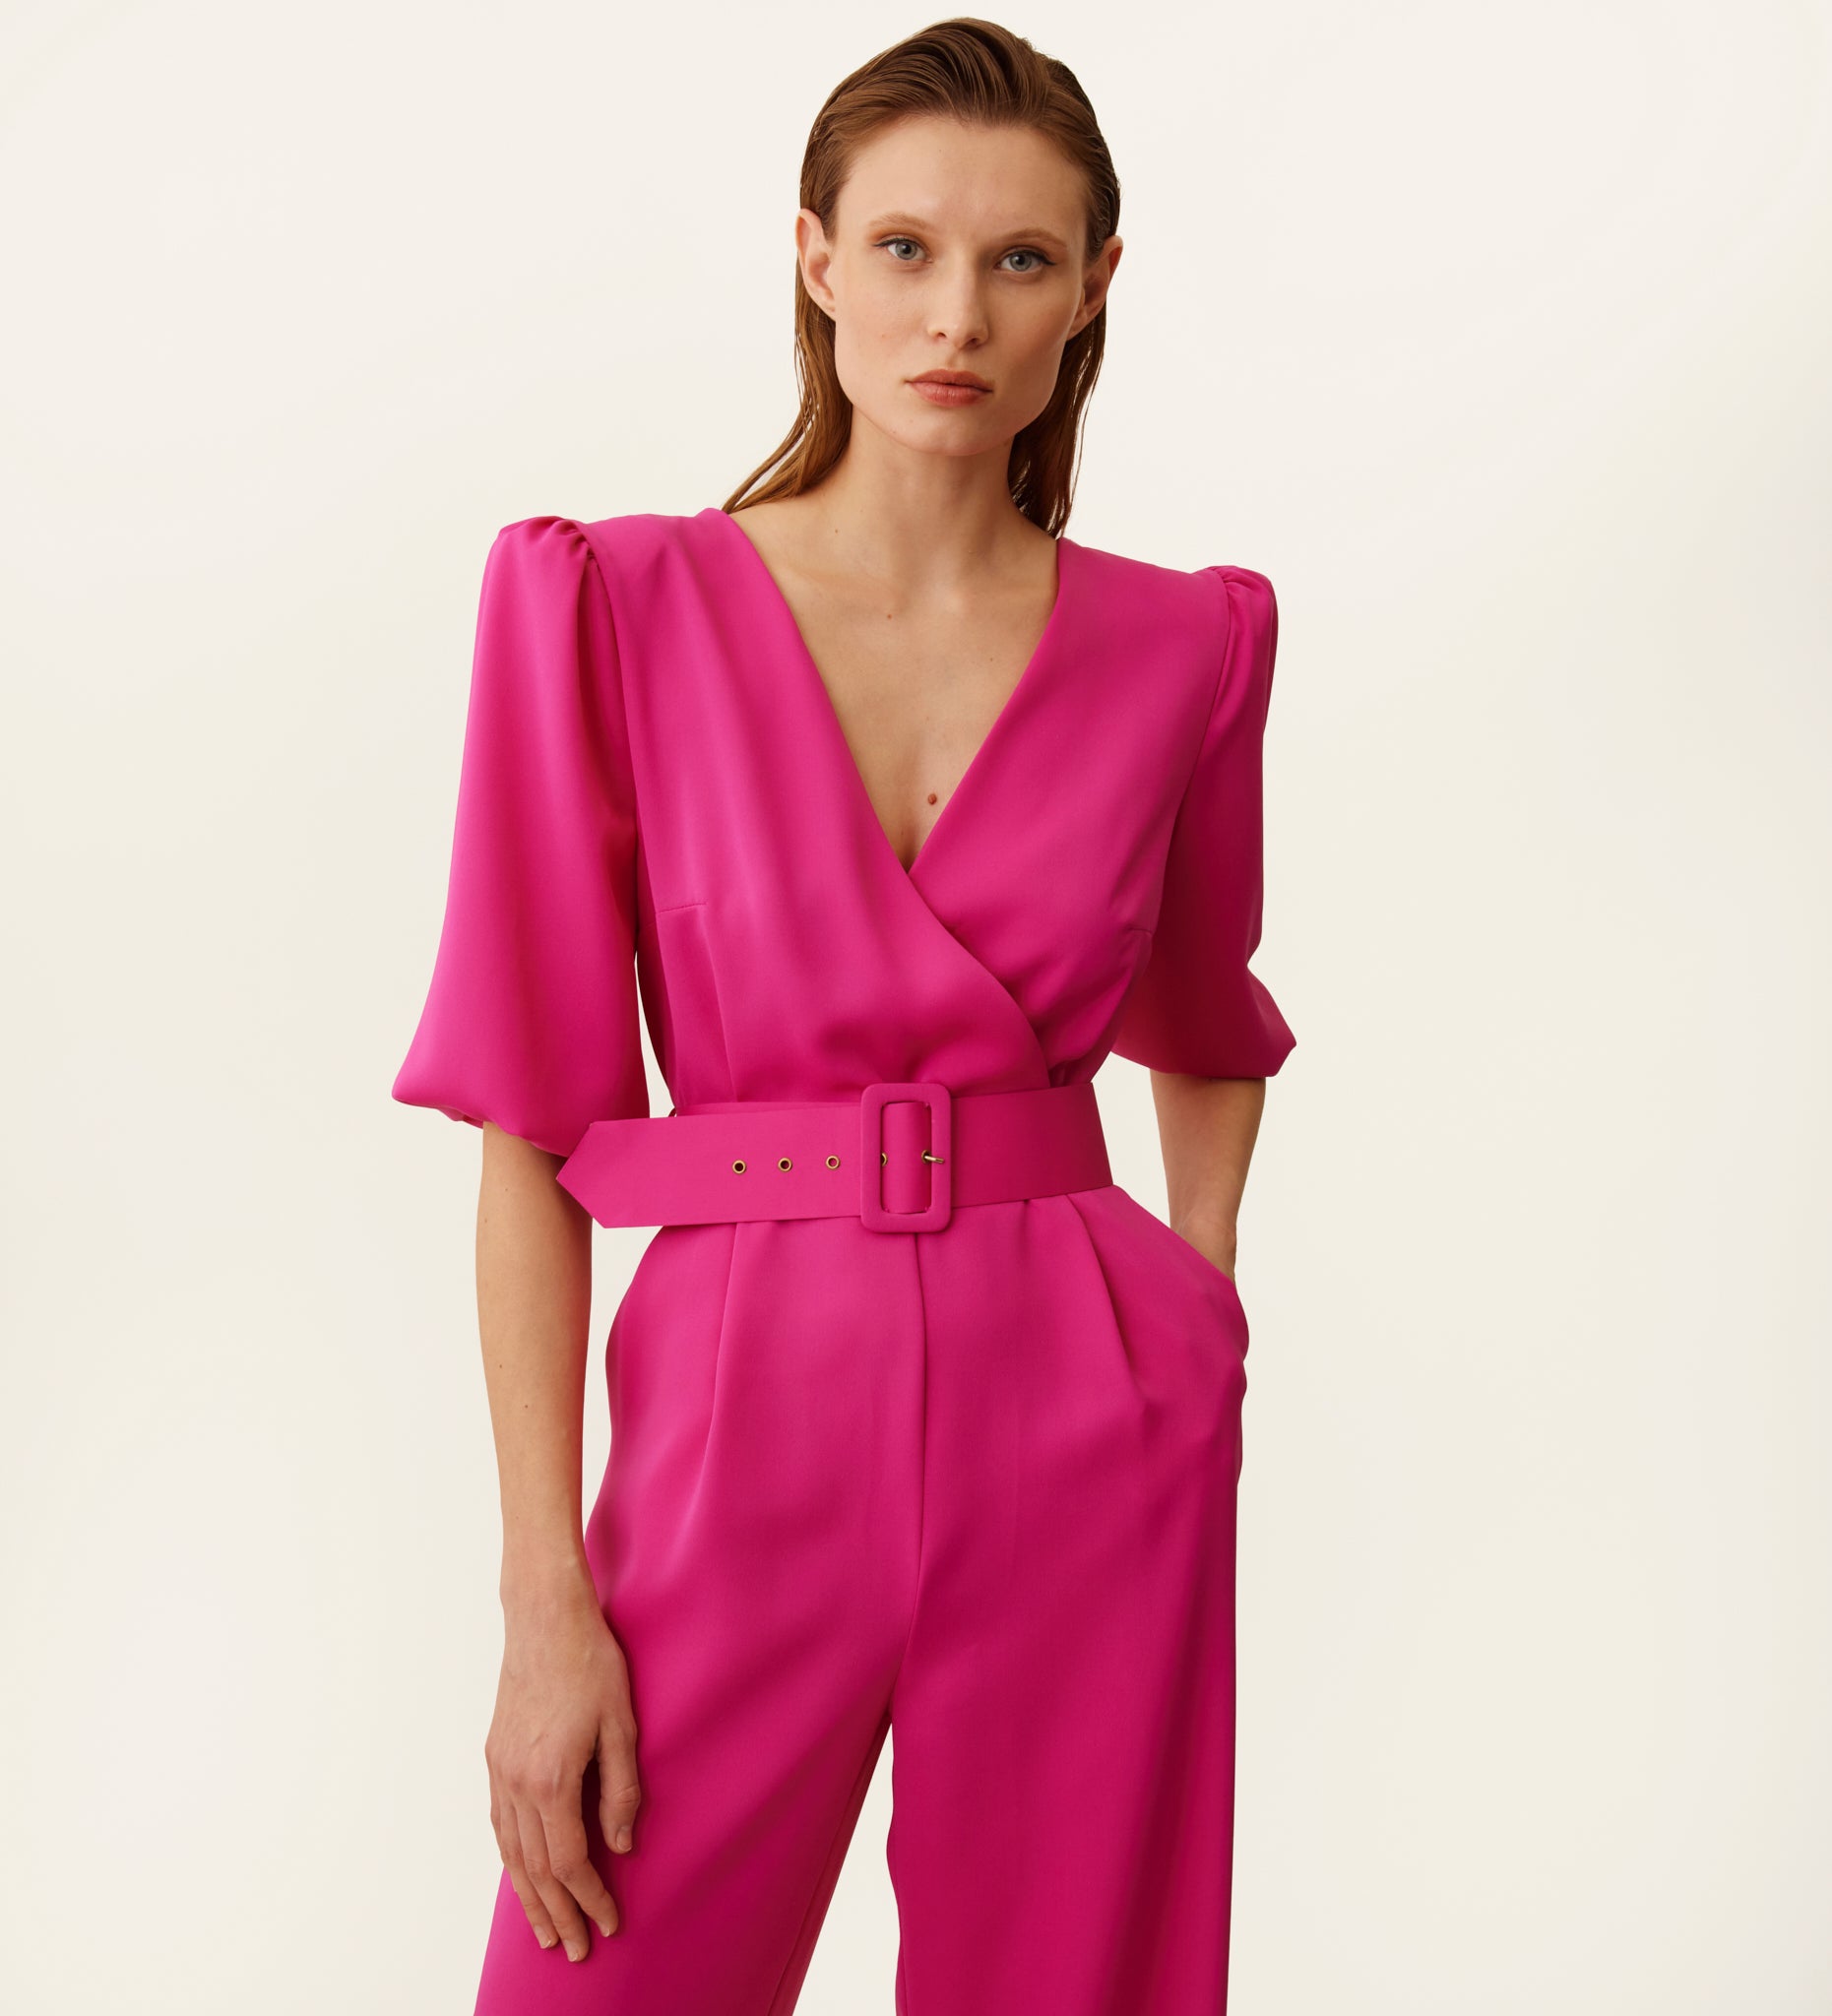 Crepe jumpsuit with sleeves